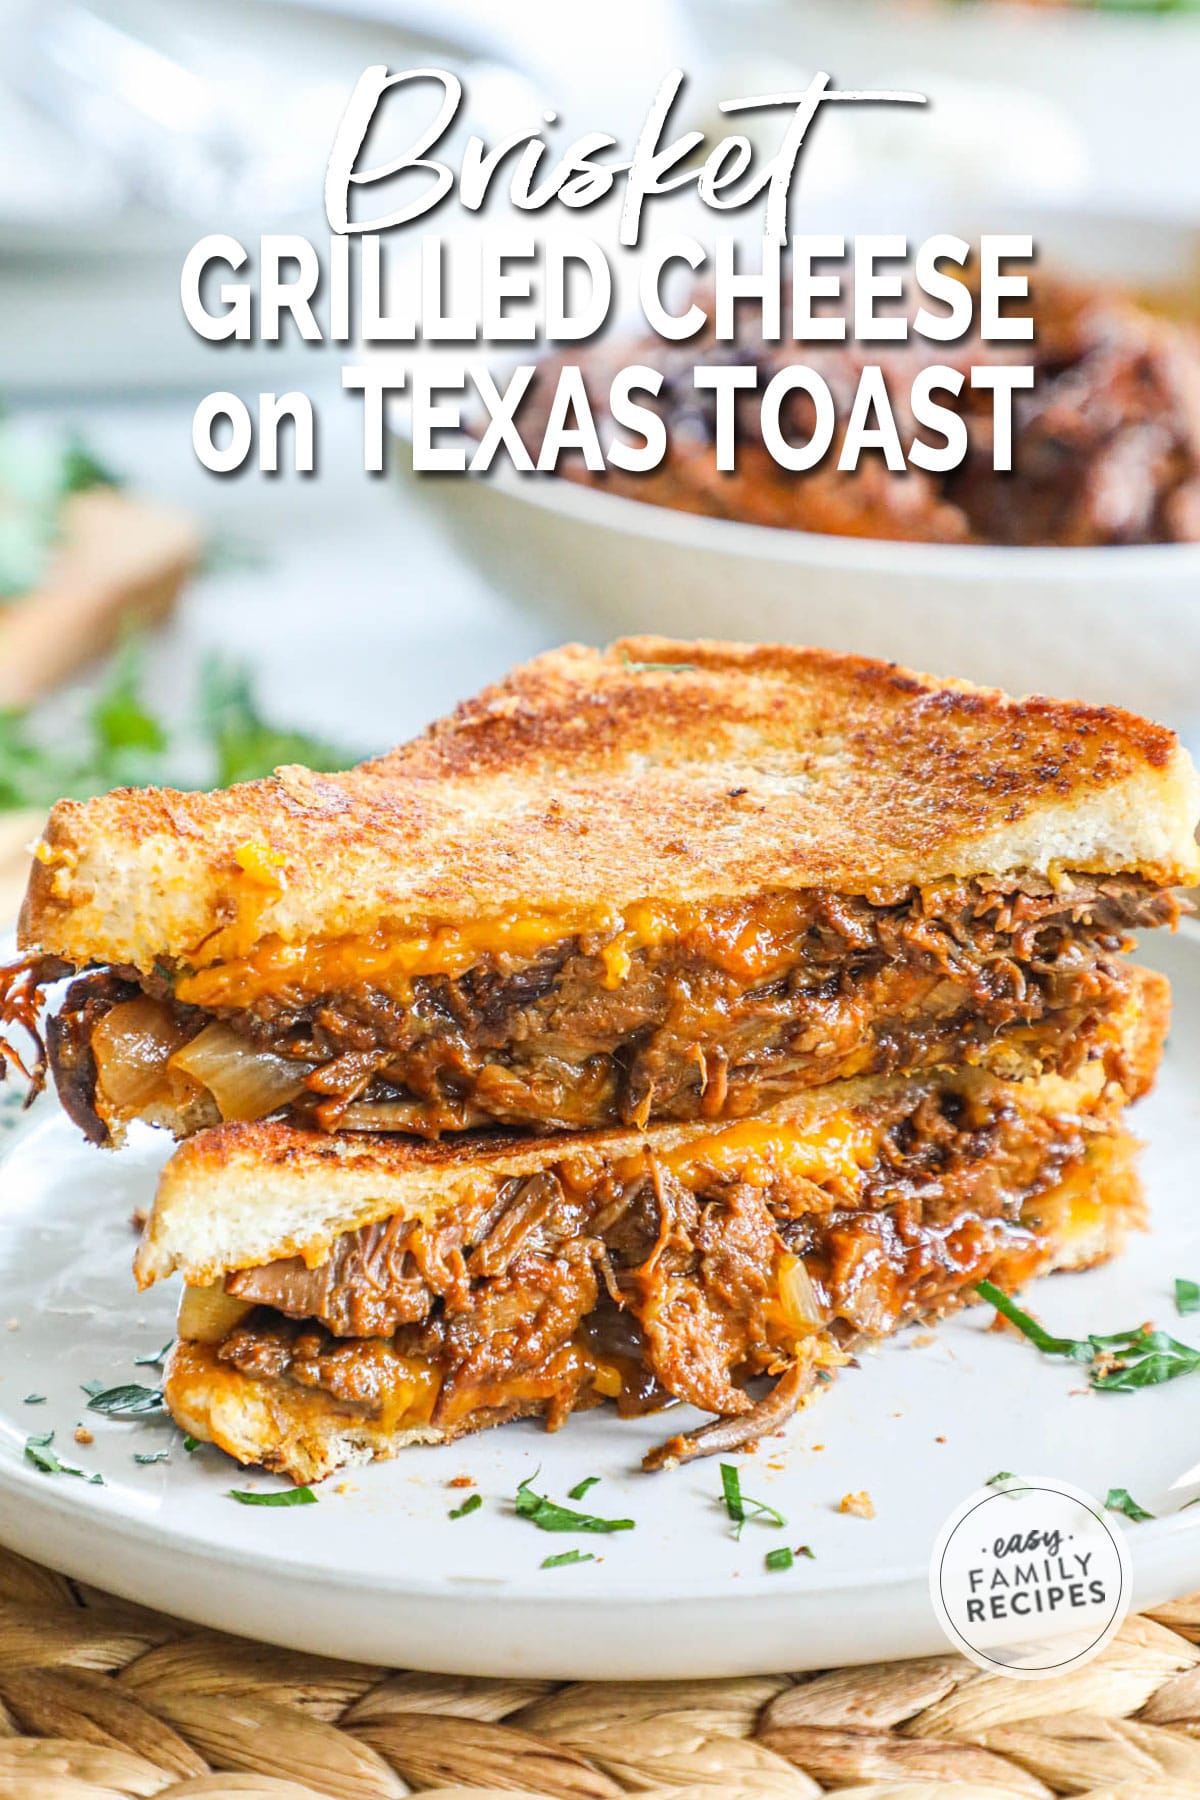 Brisket Grilled Cheese Cut in half to show cheesy beefy middle